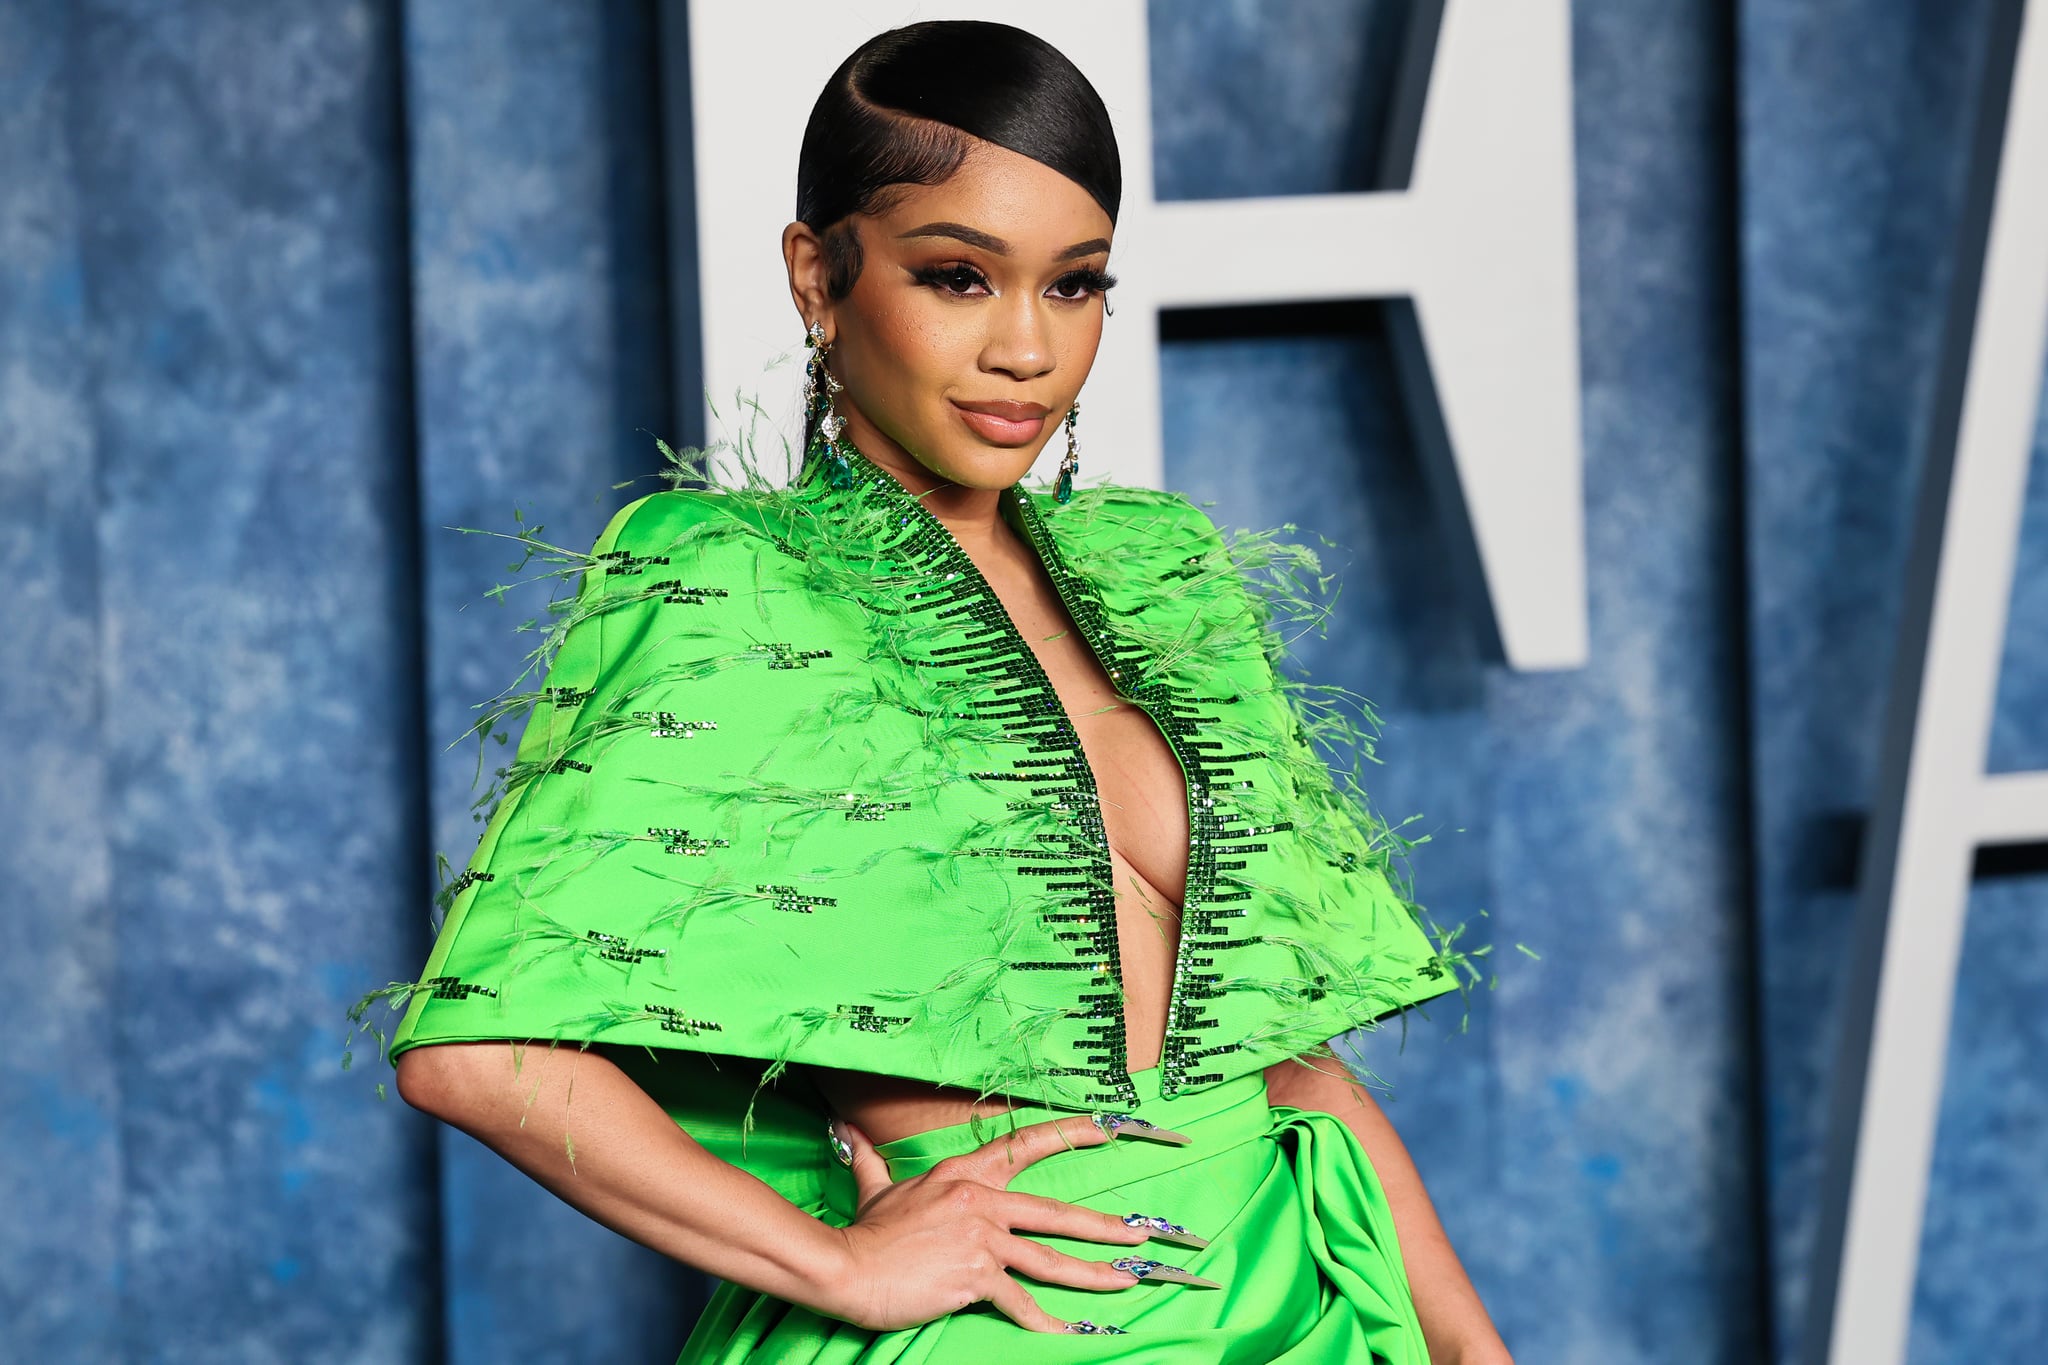 BEVERLY HILLS, CALIFORNIA - MARCH 12: Saweetie attends the 2023 Vanity Fair Oscar Party Hosted By Radhika Jones at Wallis Annenberg Center for the Performing Arts on March 12, 2023 in Beverly Hills, California. (Photo by Leon Bennett/FilmMagic)